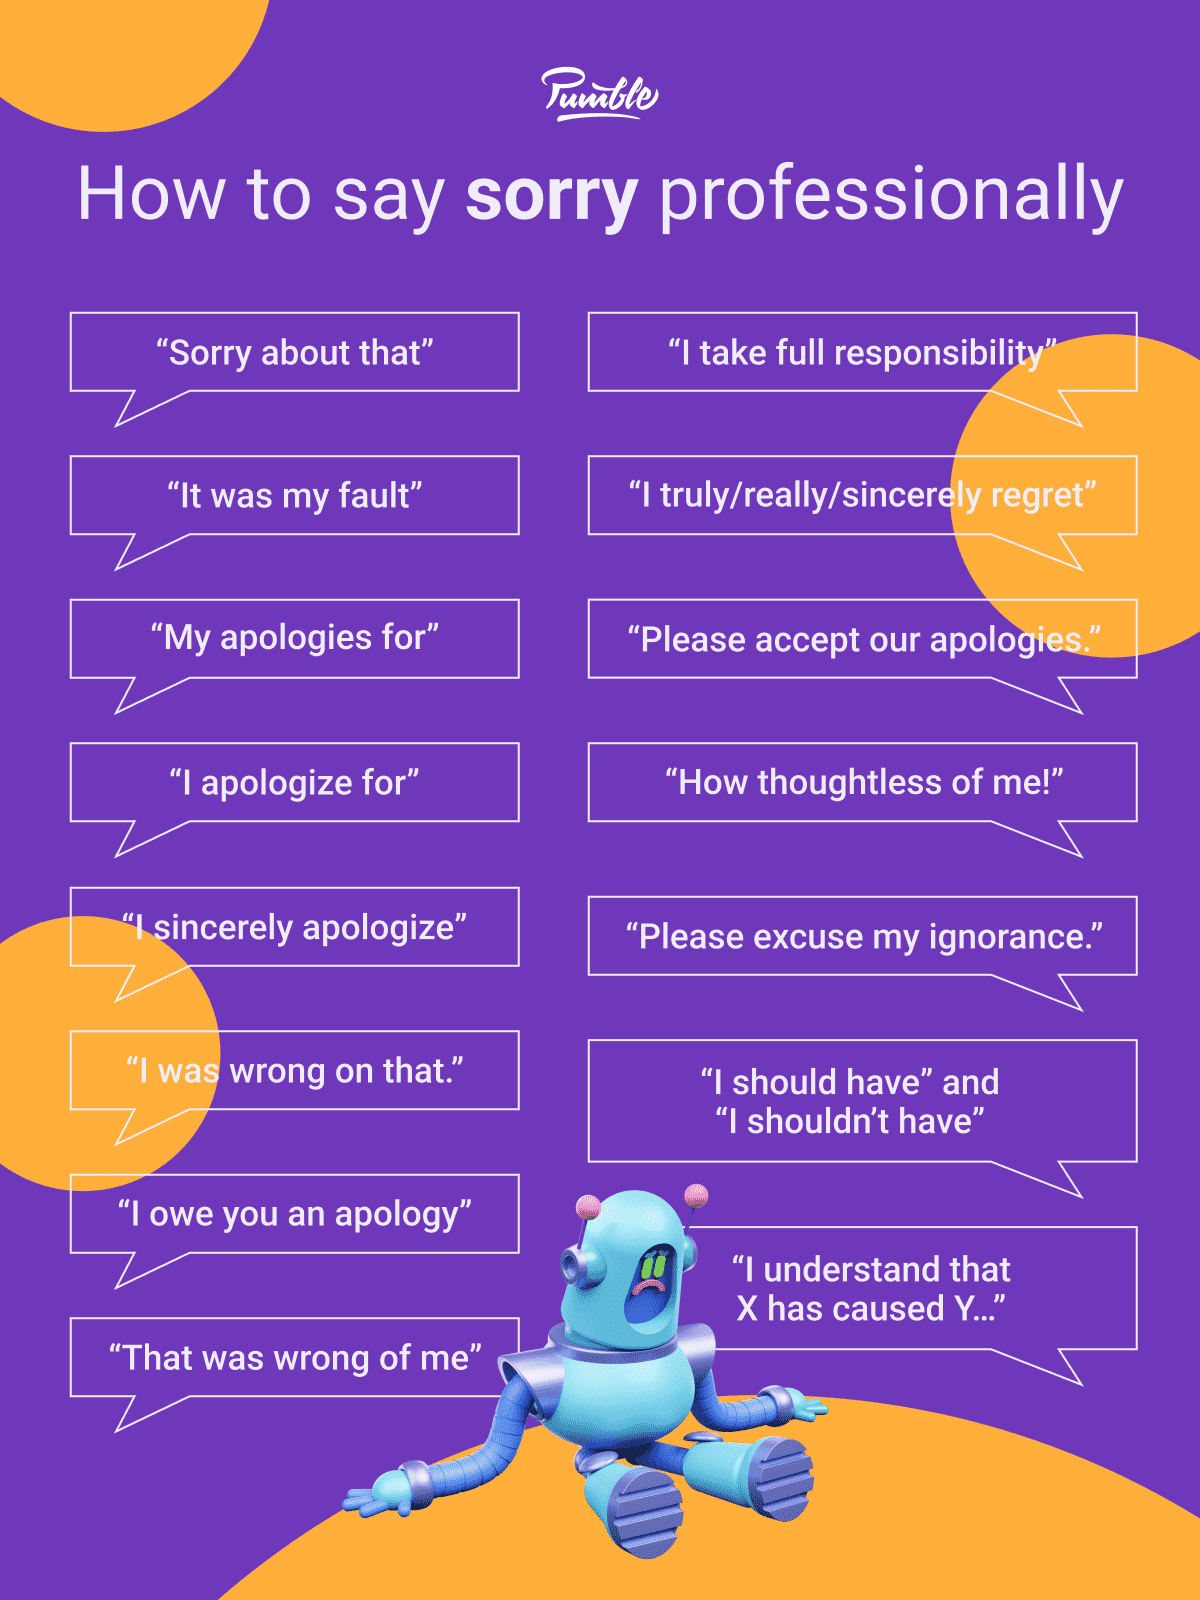 How to say sorry professionally